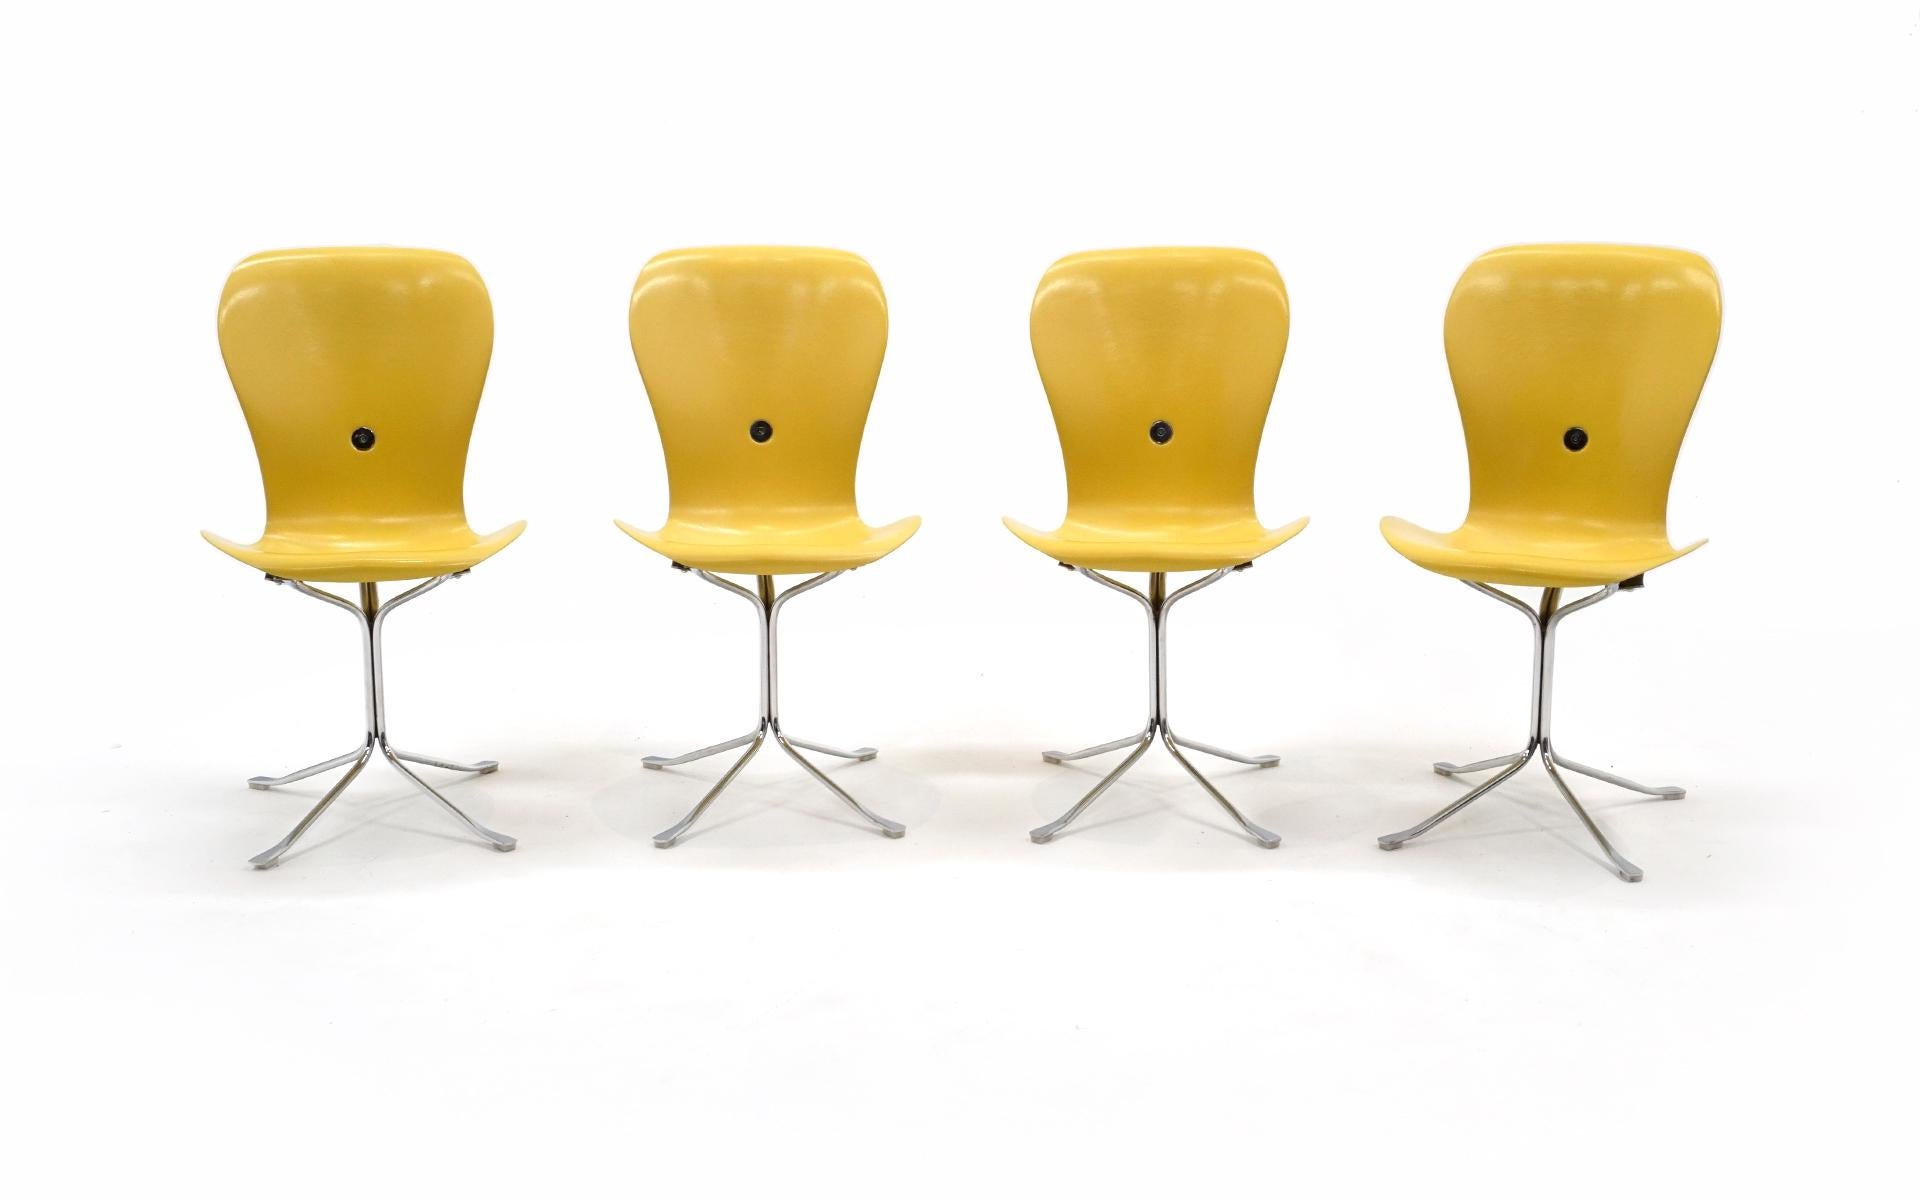 Exceptional set of four completely original Ion chairs designed by Gideon Kramer for the observation deck of the Seattle Space Needle. The original yellow finish is in very good condition with no chips, cracks, or repairs. Very light scratches may